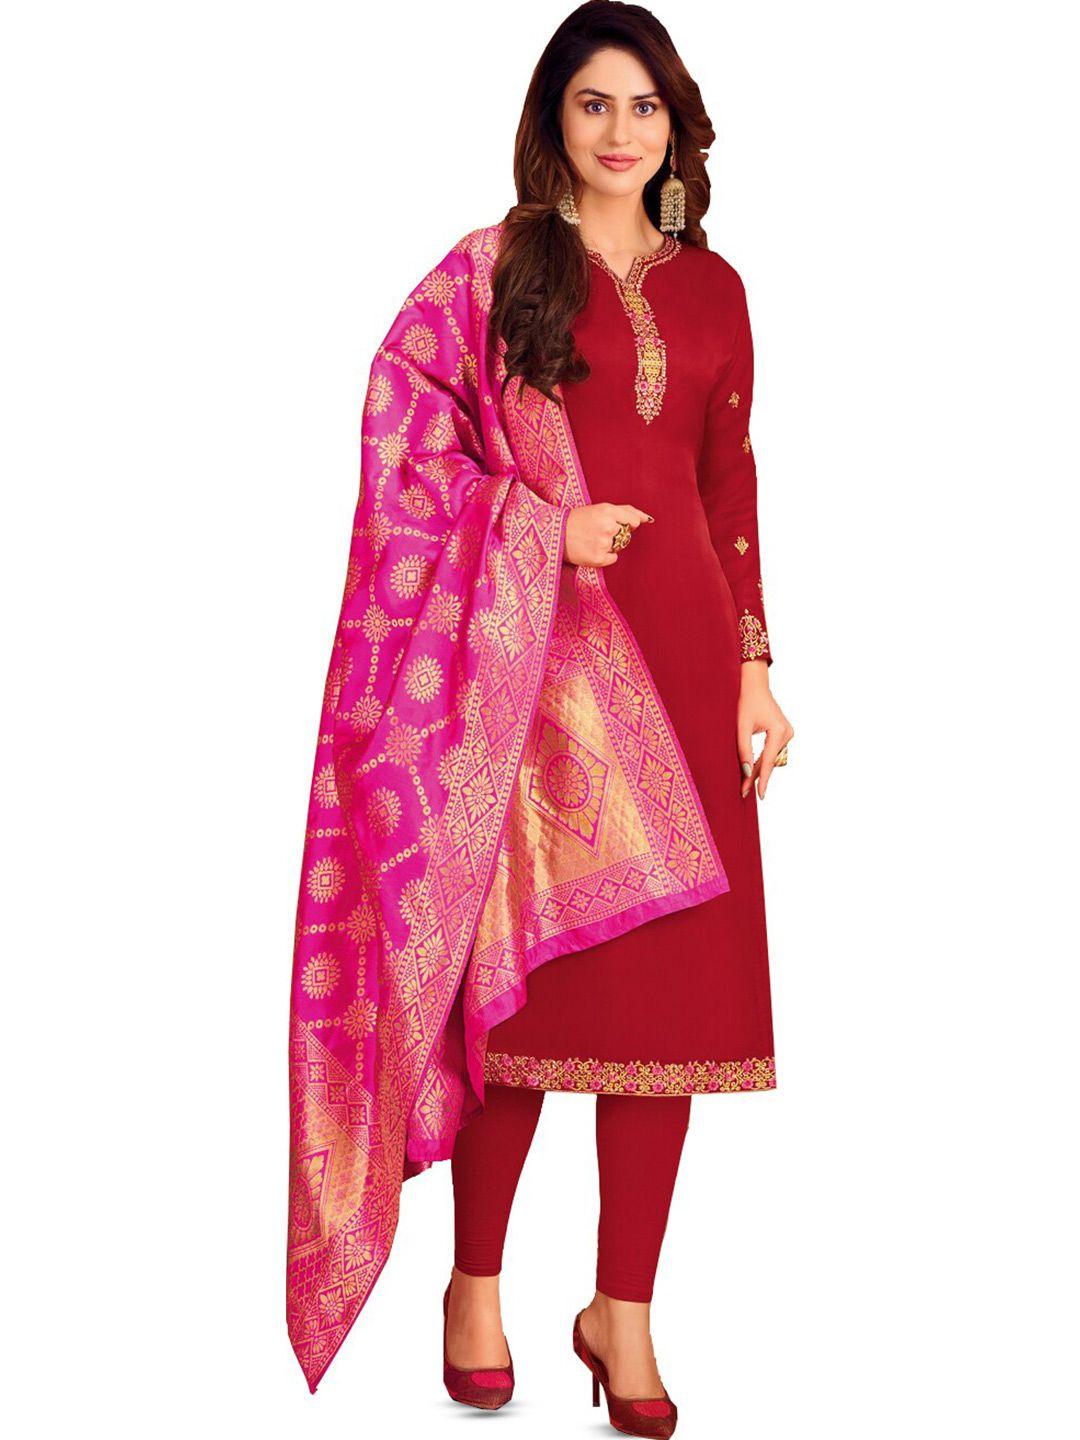 mf-maroon-&-gold-toned-embroidered-unstitched-dress-material